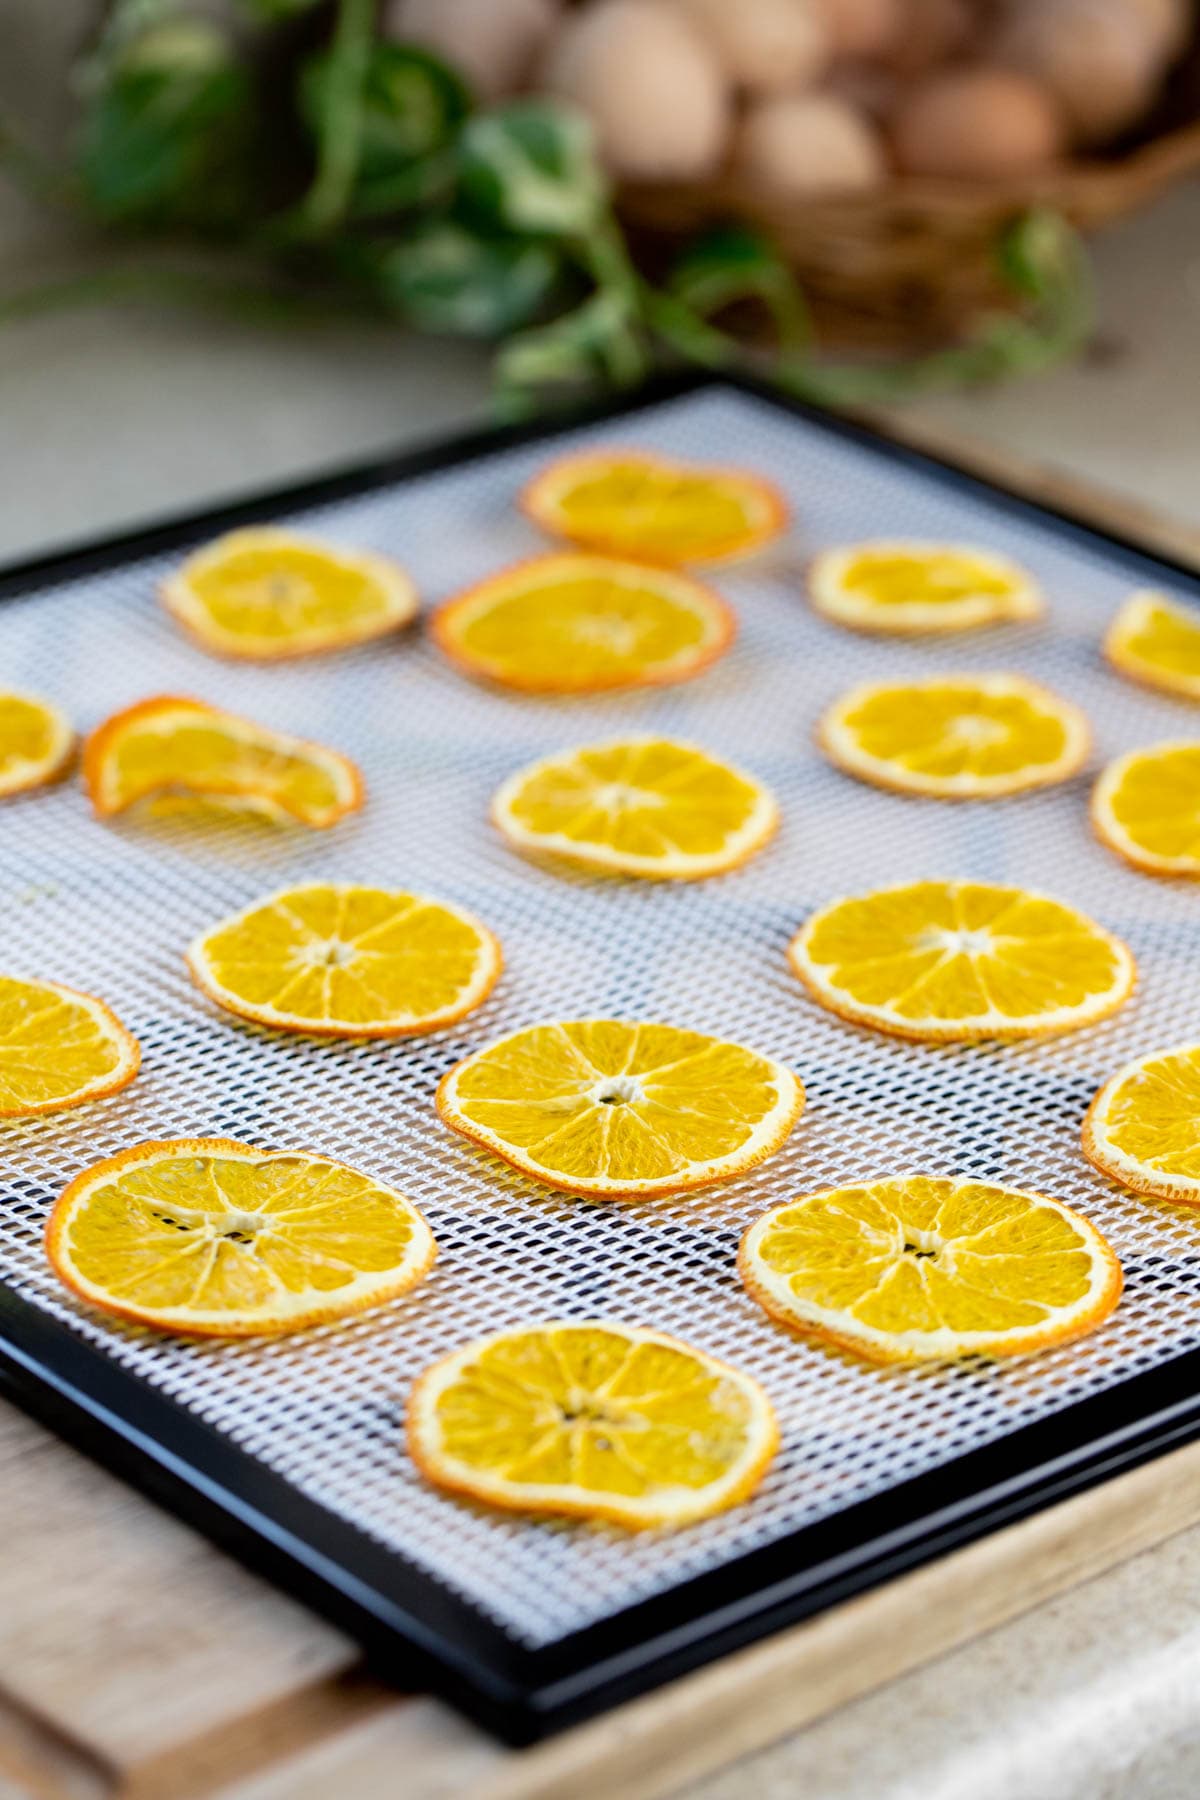 orange slices after drying in the dehydrator